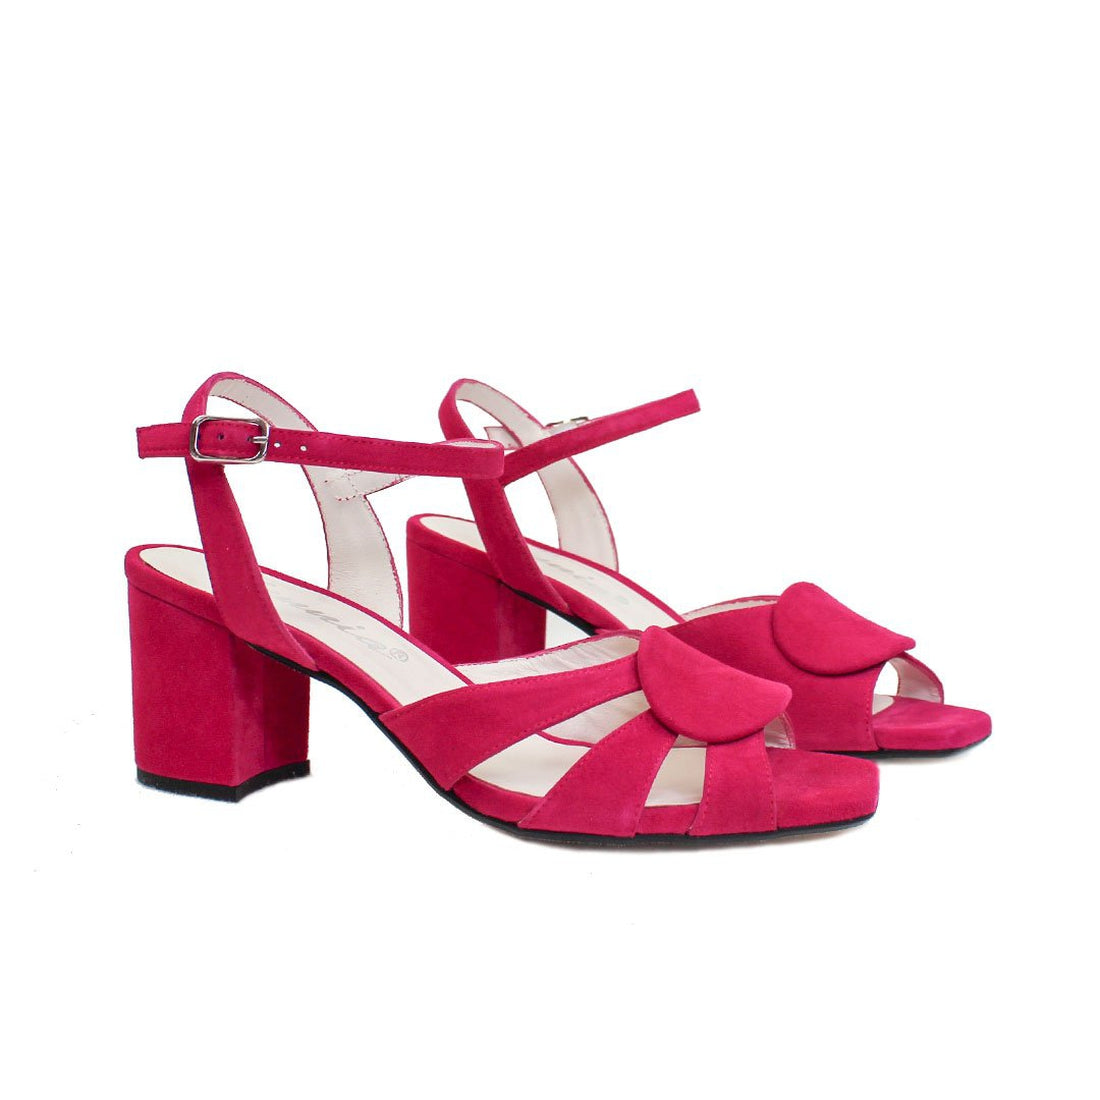 SILVIA Magenta Pink Suede Leather